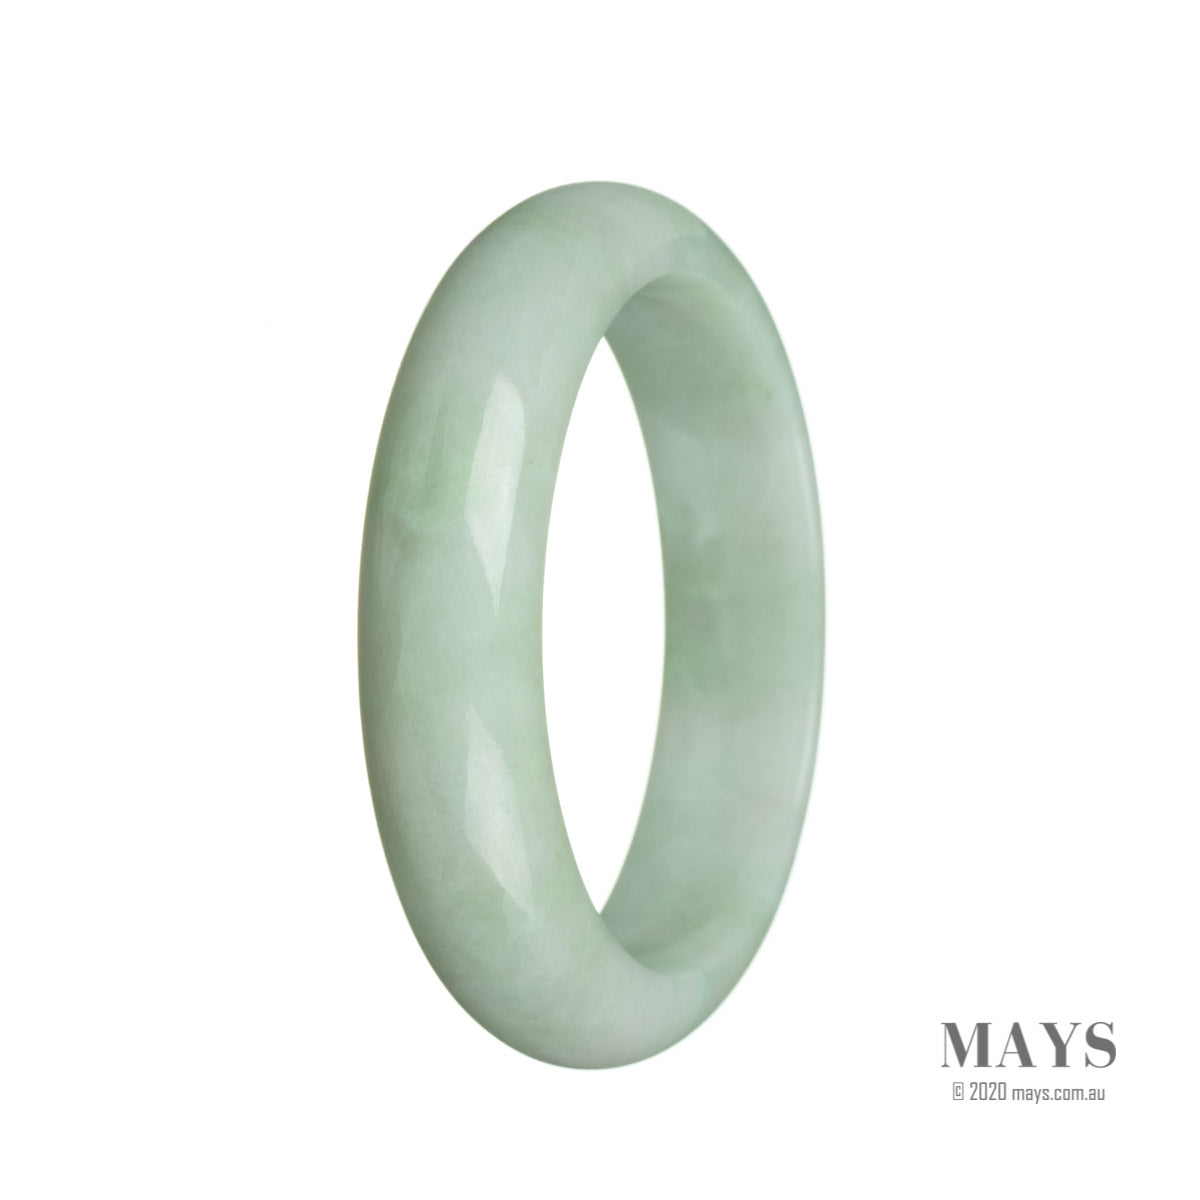 A close-up image of a light green jadeite bangle with a half-moon shape, measuring 62mm in diameter. This bangle is certified as Type A jadeite, ensuring its authenticity and quality. It is a beautiful and elegant piece of jewelry from the MAYS™ collection.